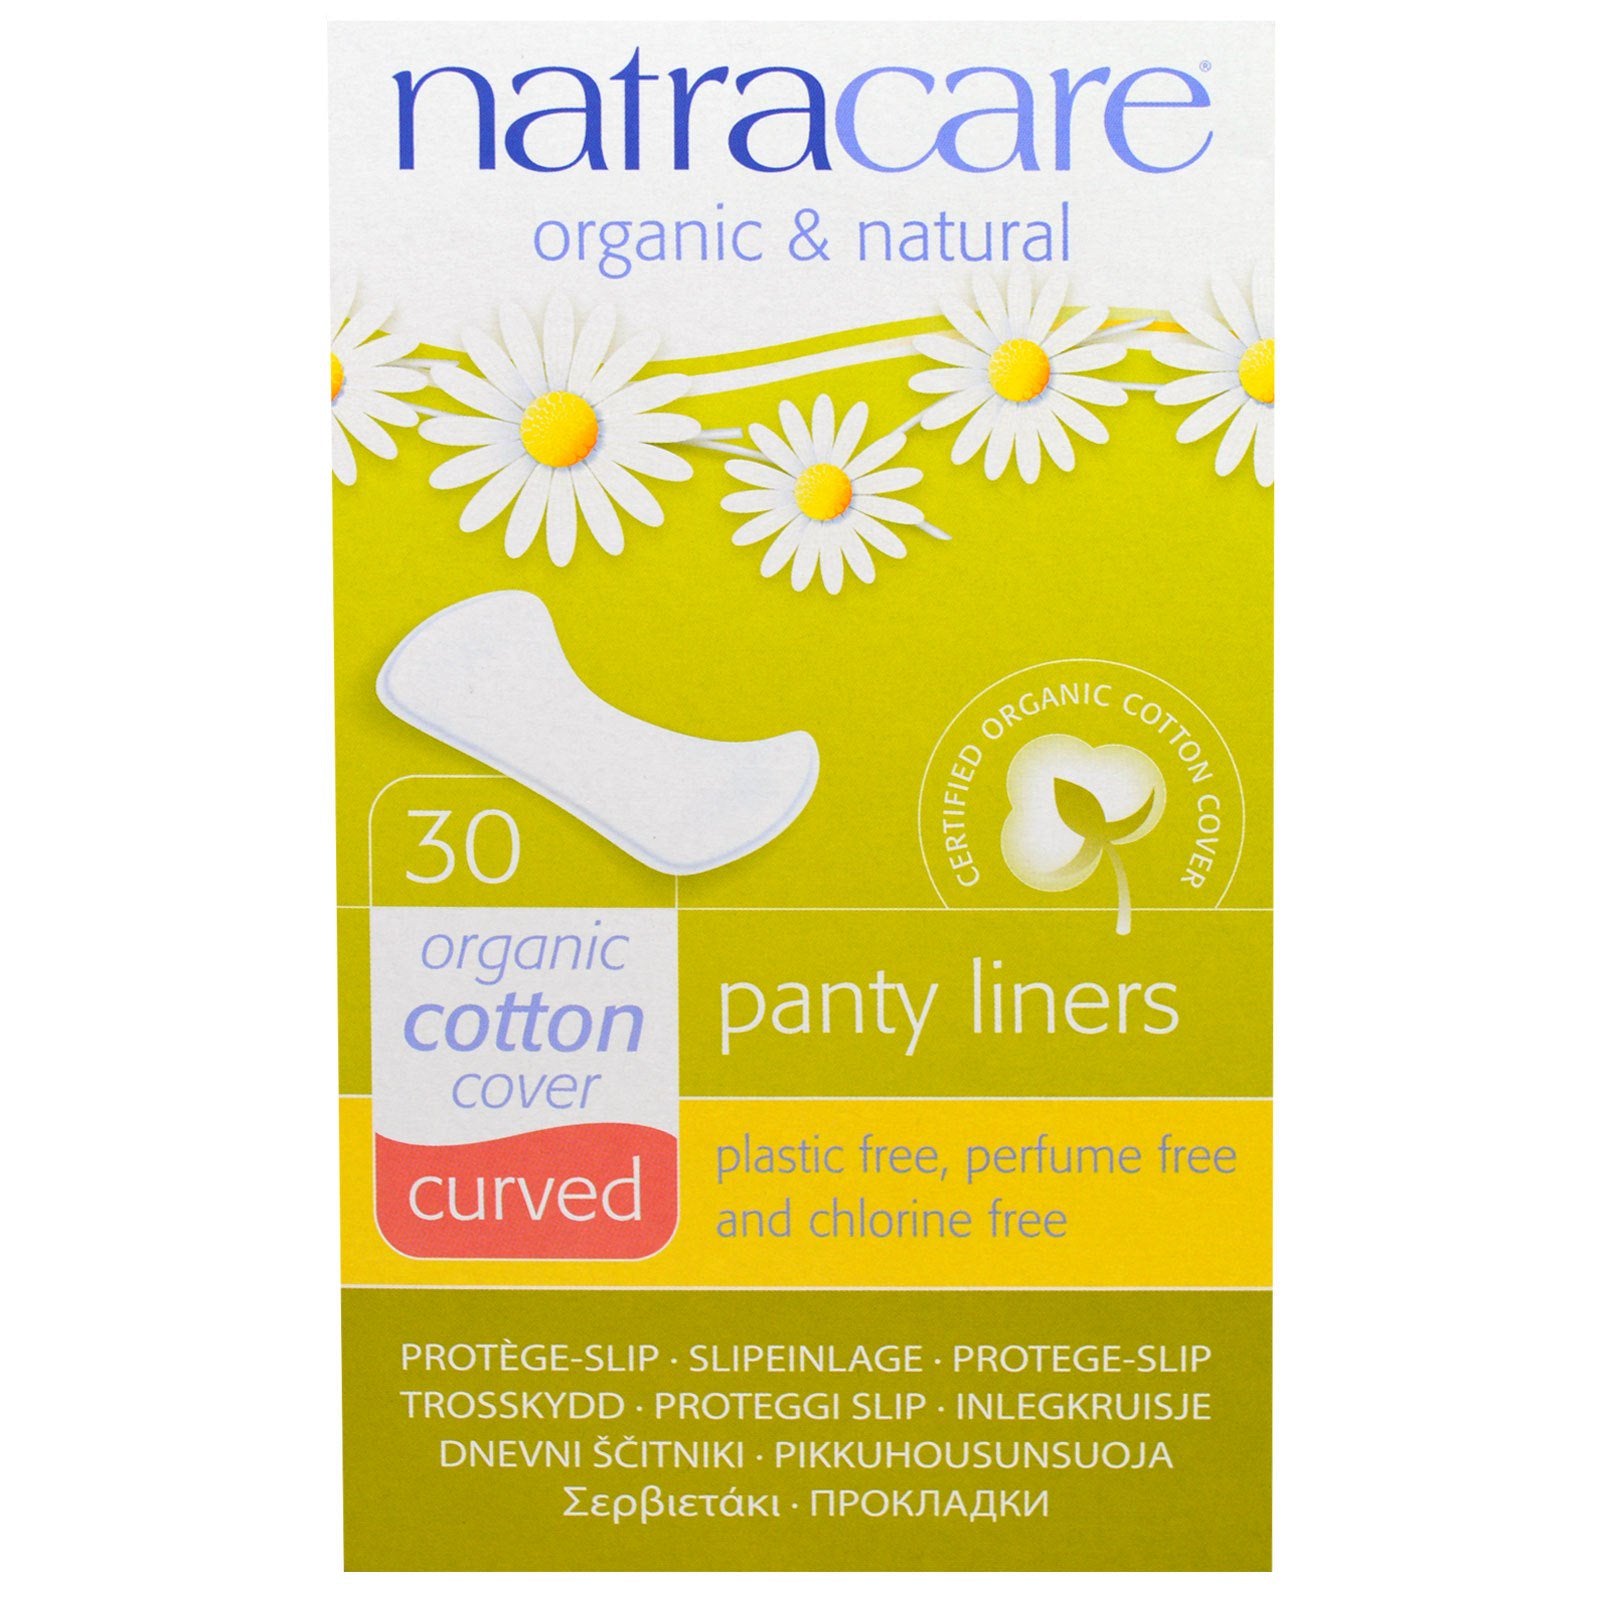 Natracare, Natural Panty Liners, 30 Curved Panty Liners